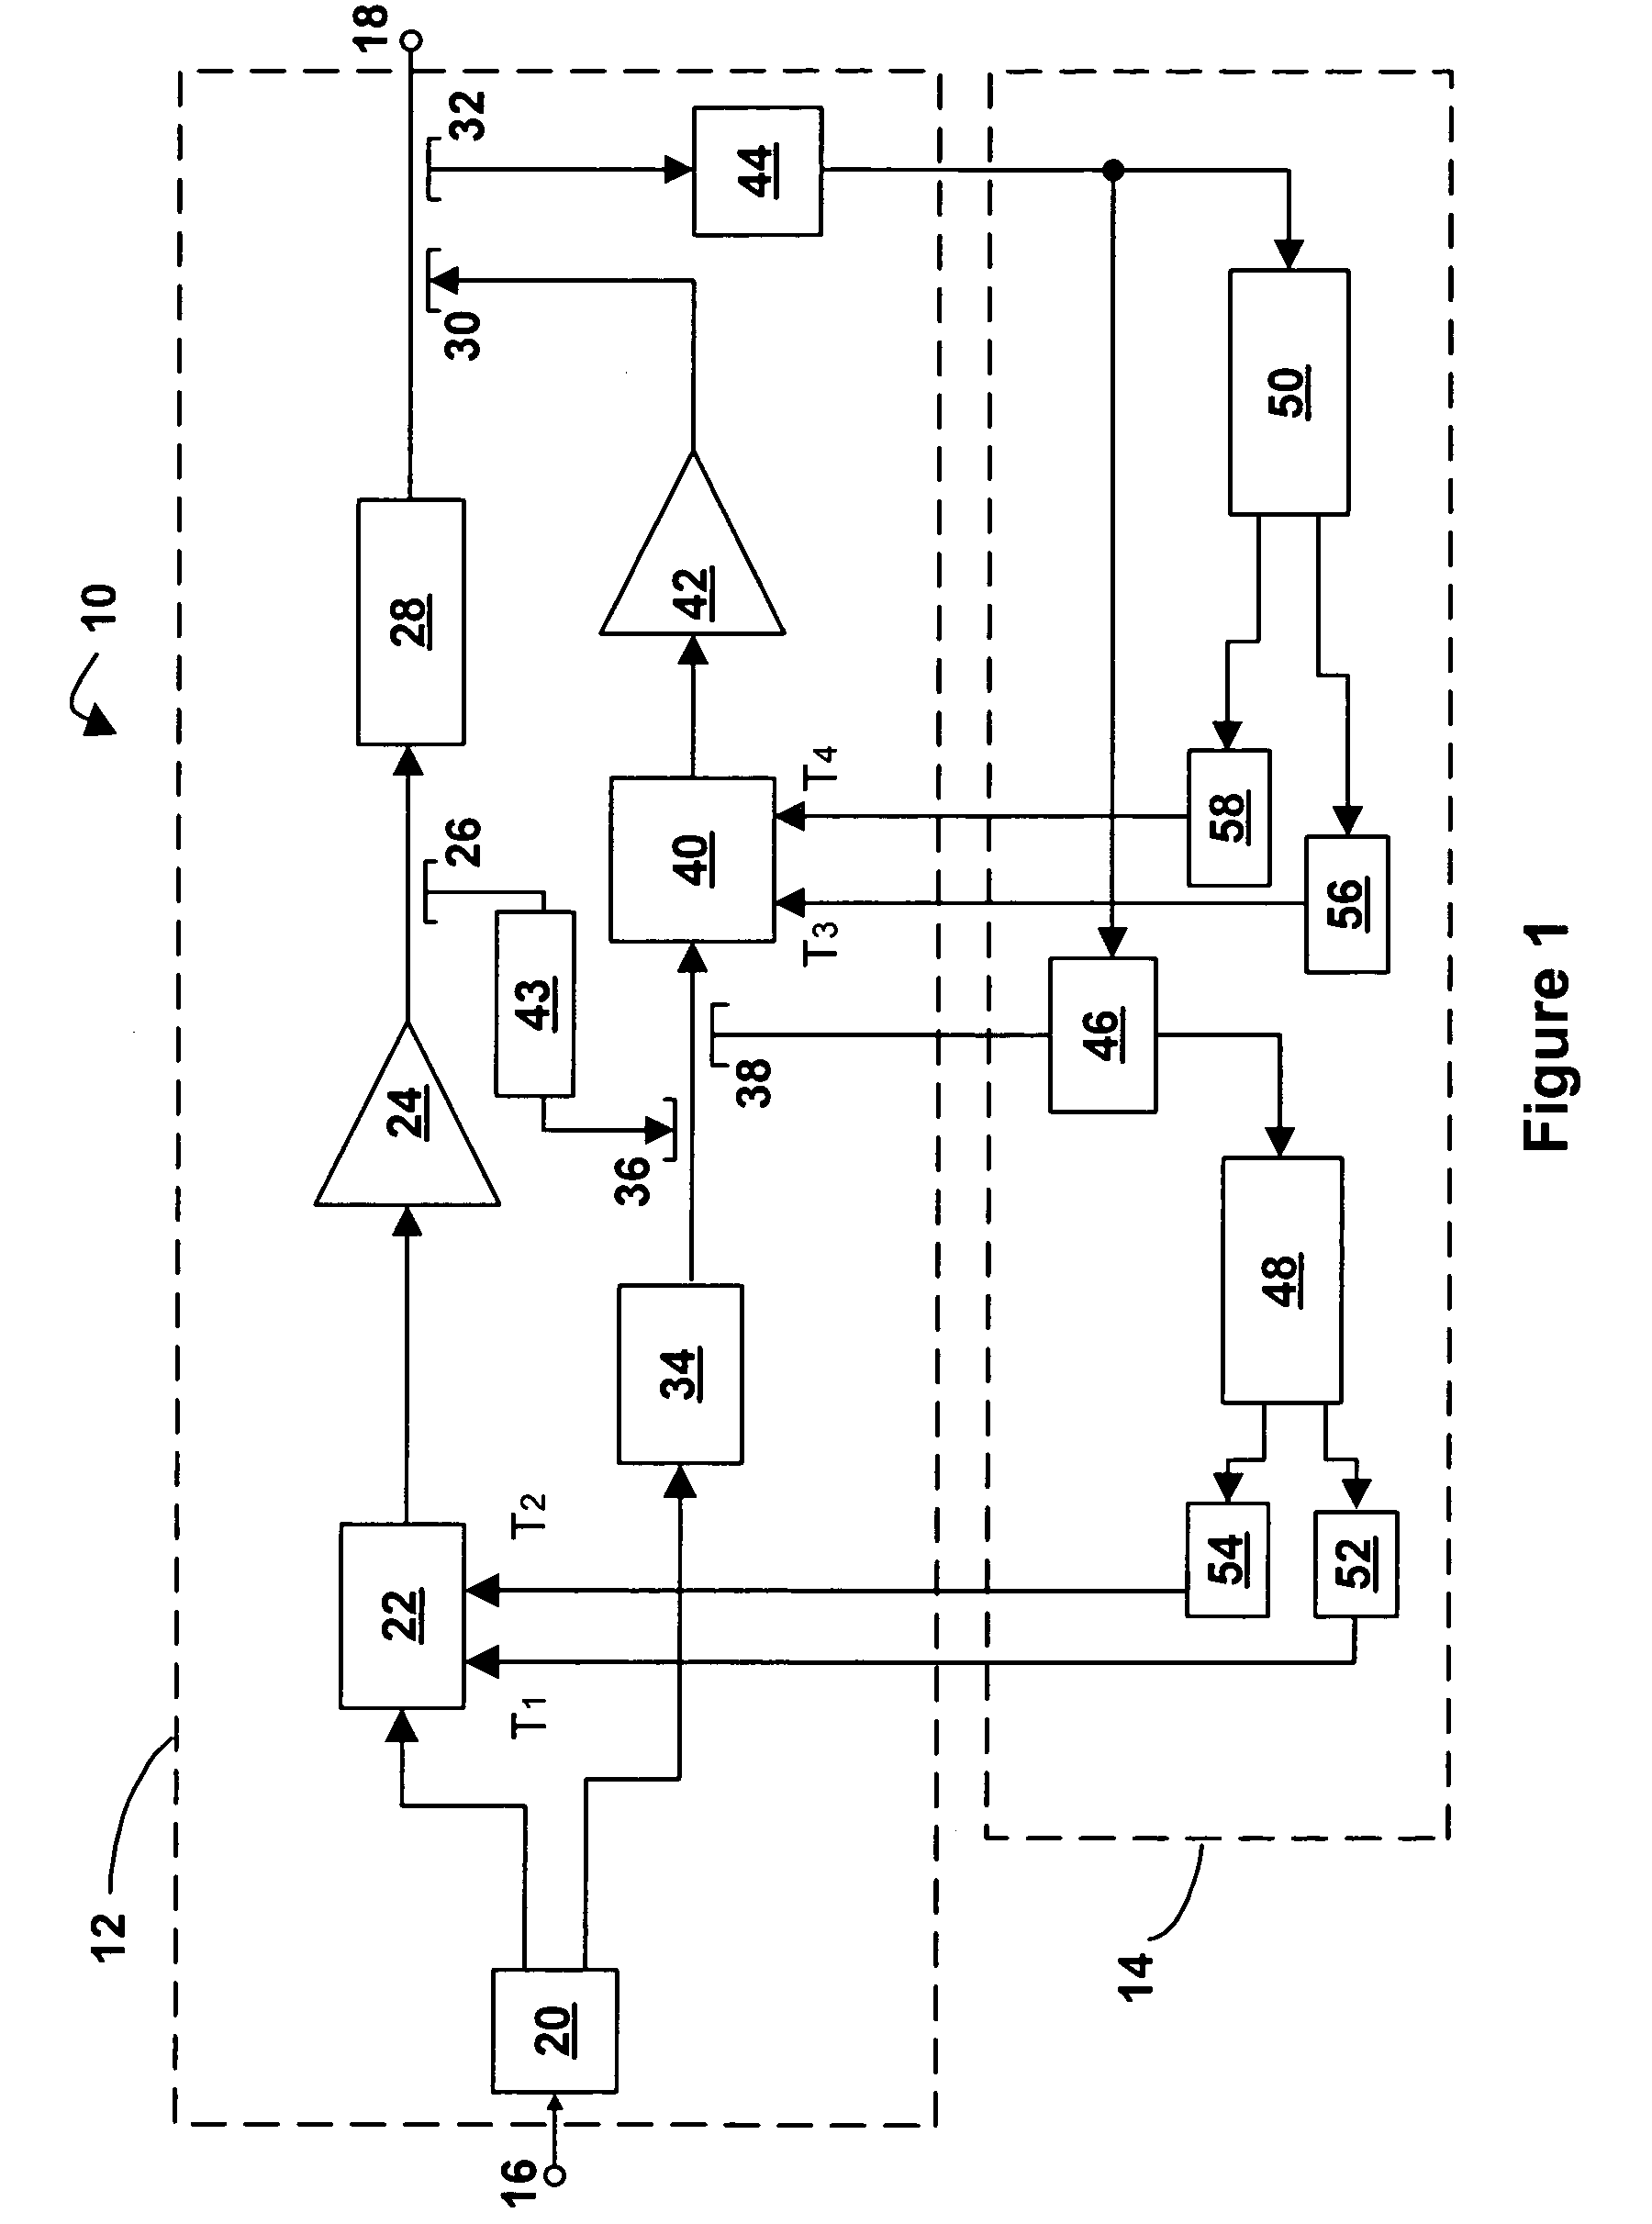 Apparatus and method for controlling feed-forward amplifiers